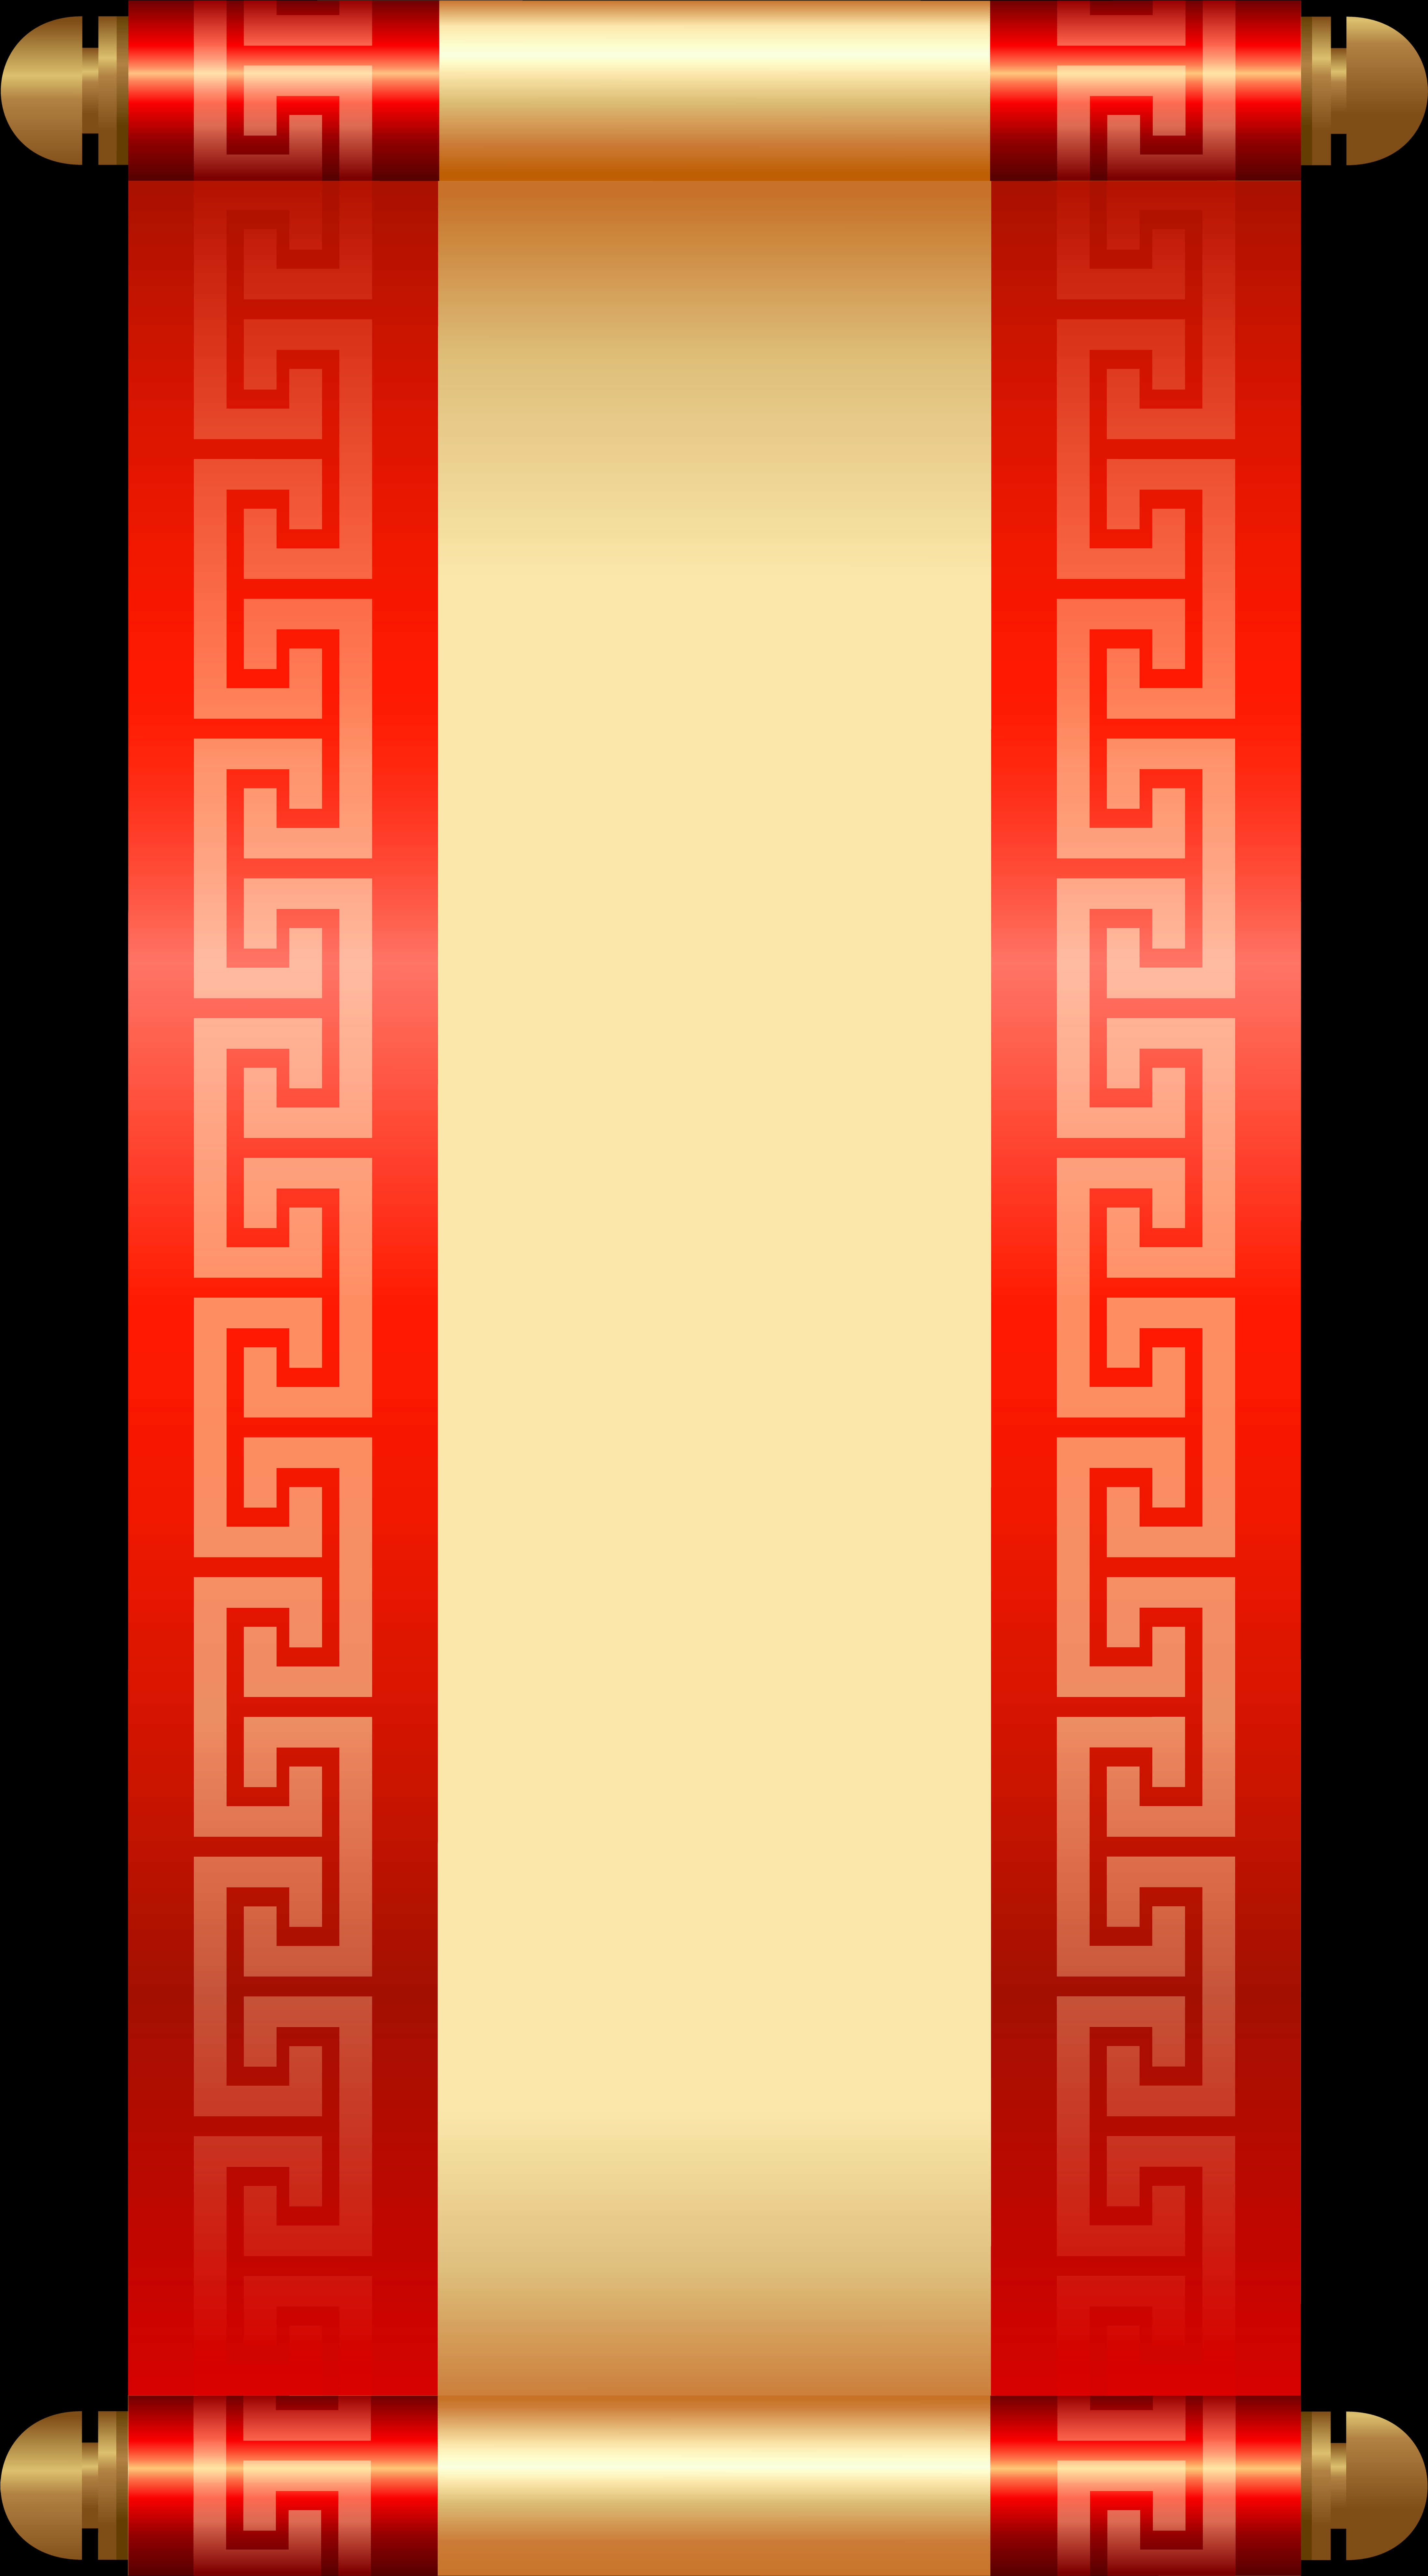 A Red And Yellow Rectangular Frame